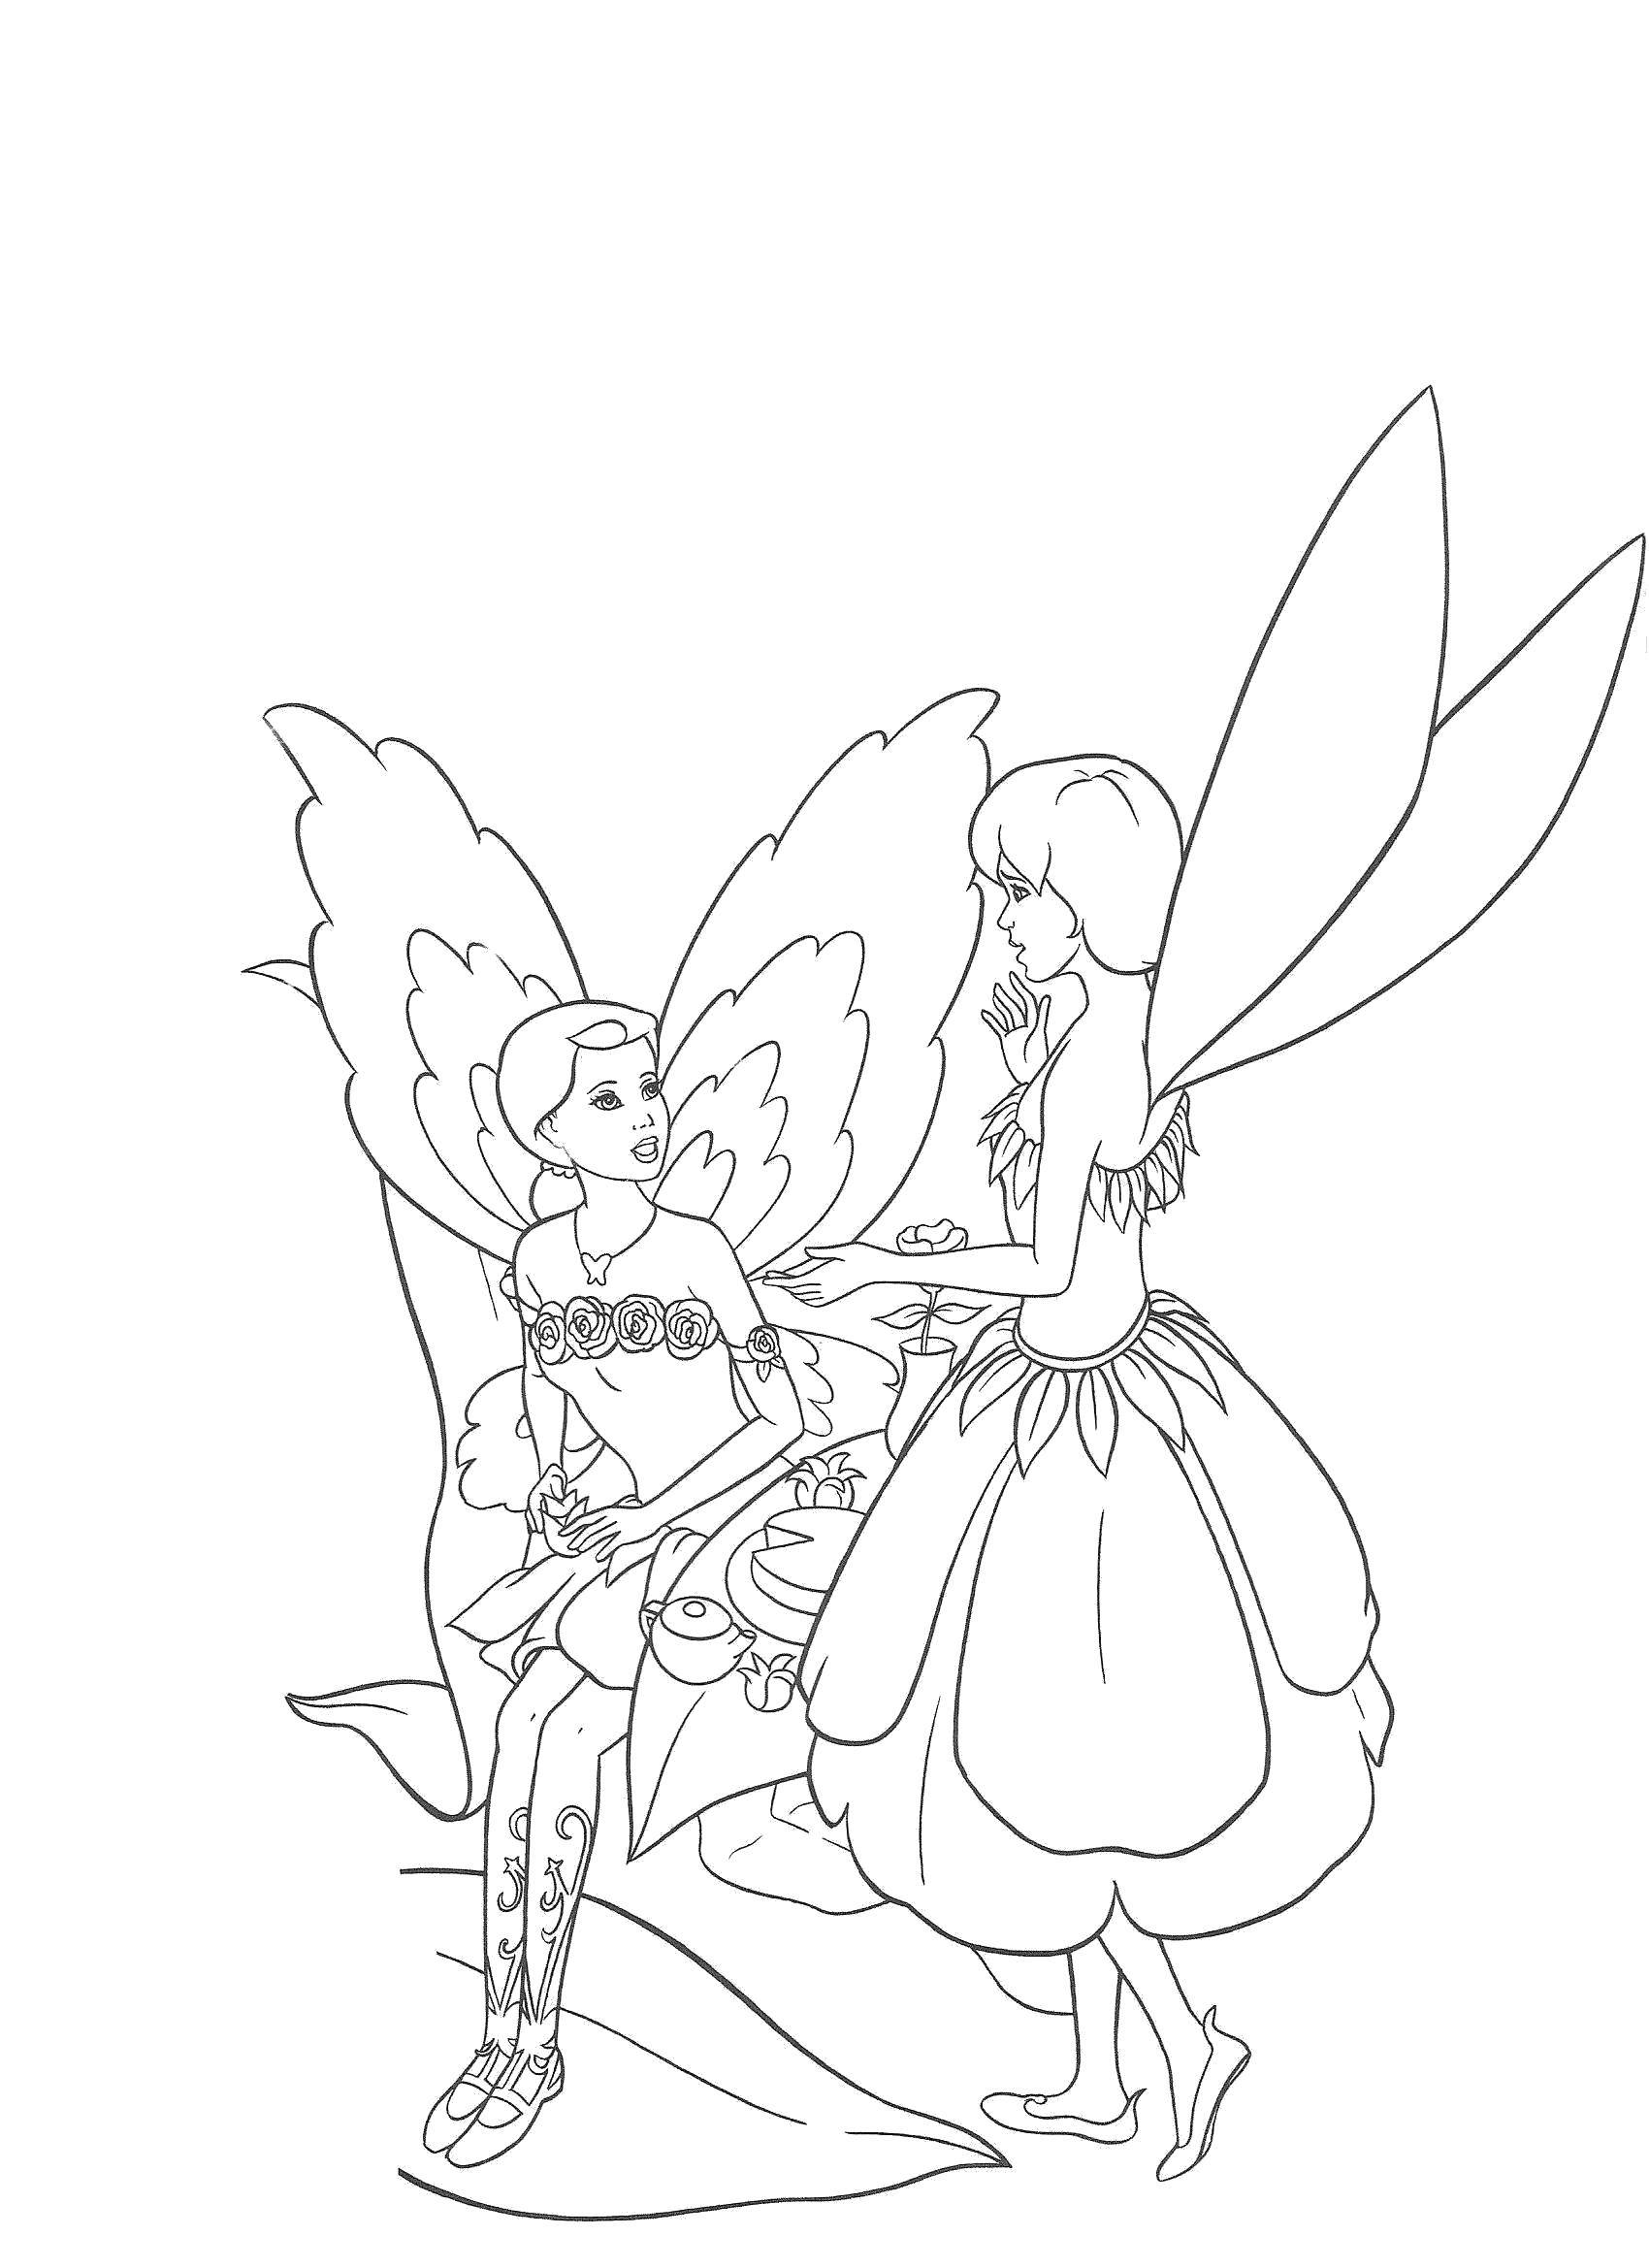 Coloring Forest fairy. Category fairies. Tags:  Fairy, forest, fairy tale.